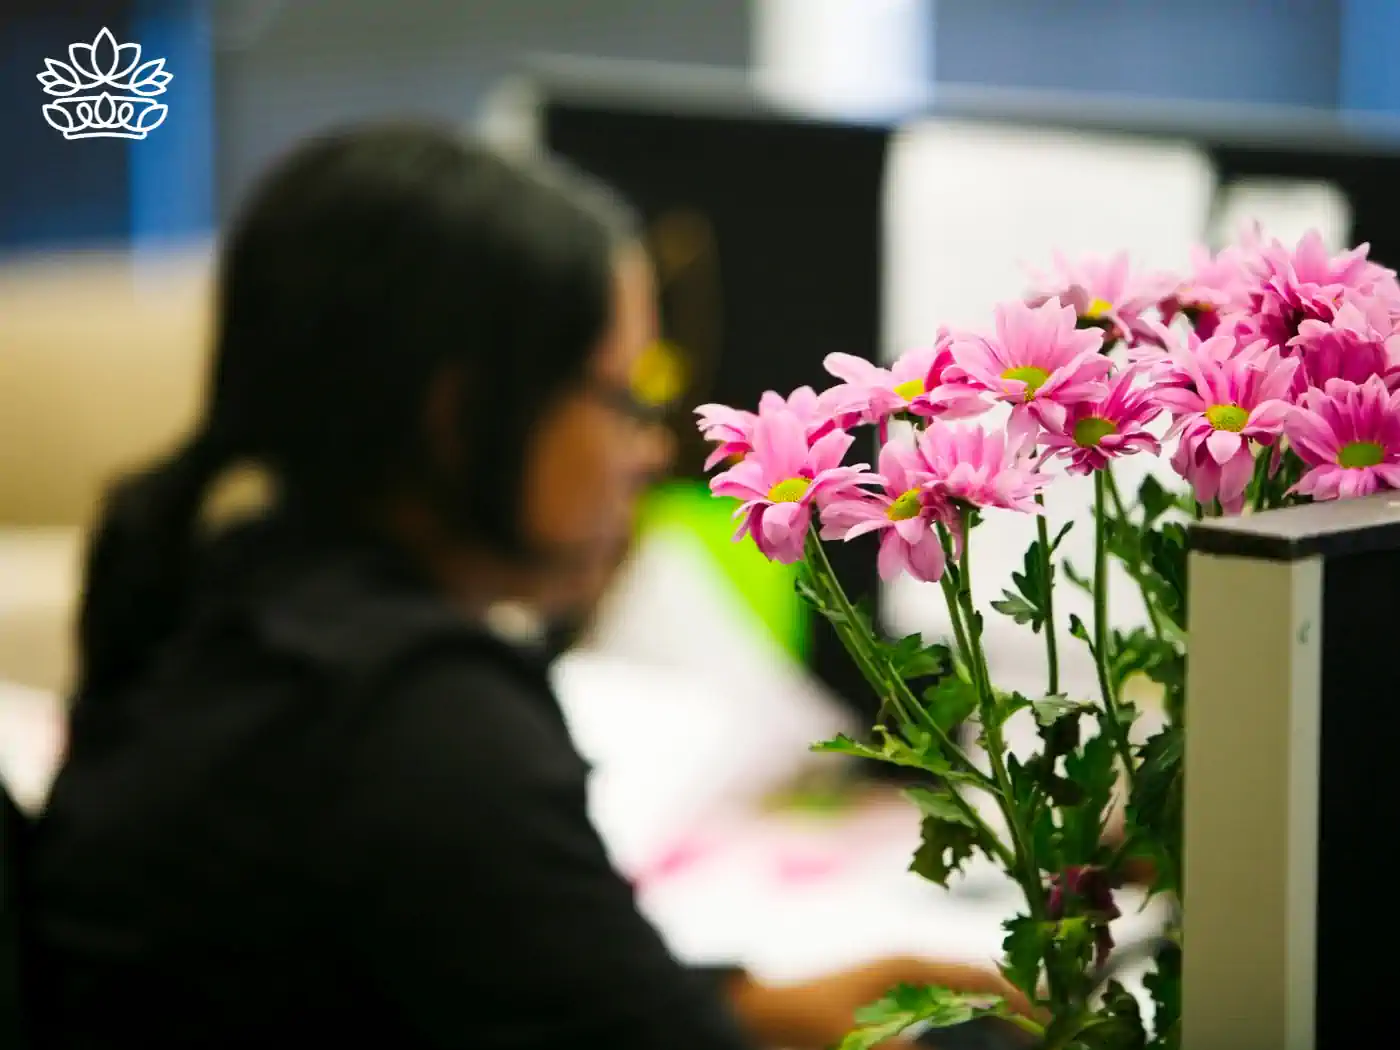 Close-up of a bouquet of pink flowers on an office desk with a blurred background of a woman working. Fabulous Flowers and Gifts, Office Collection.